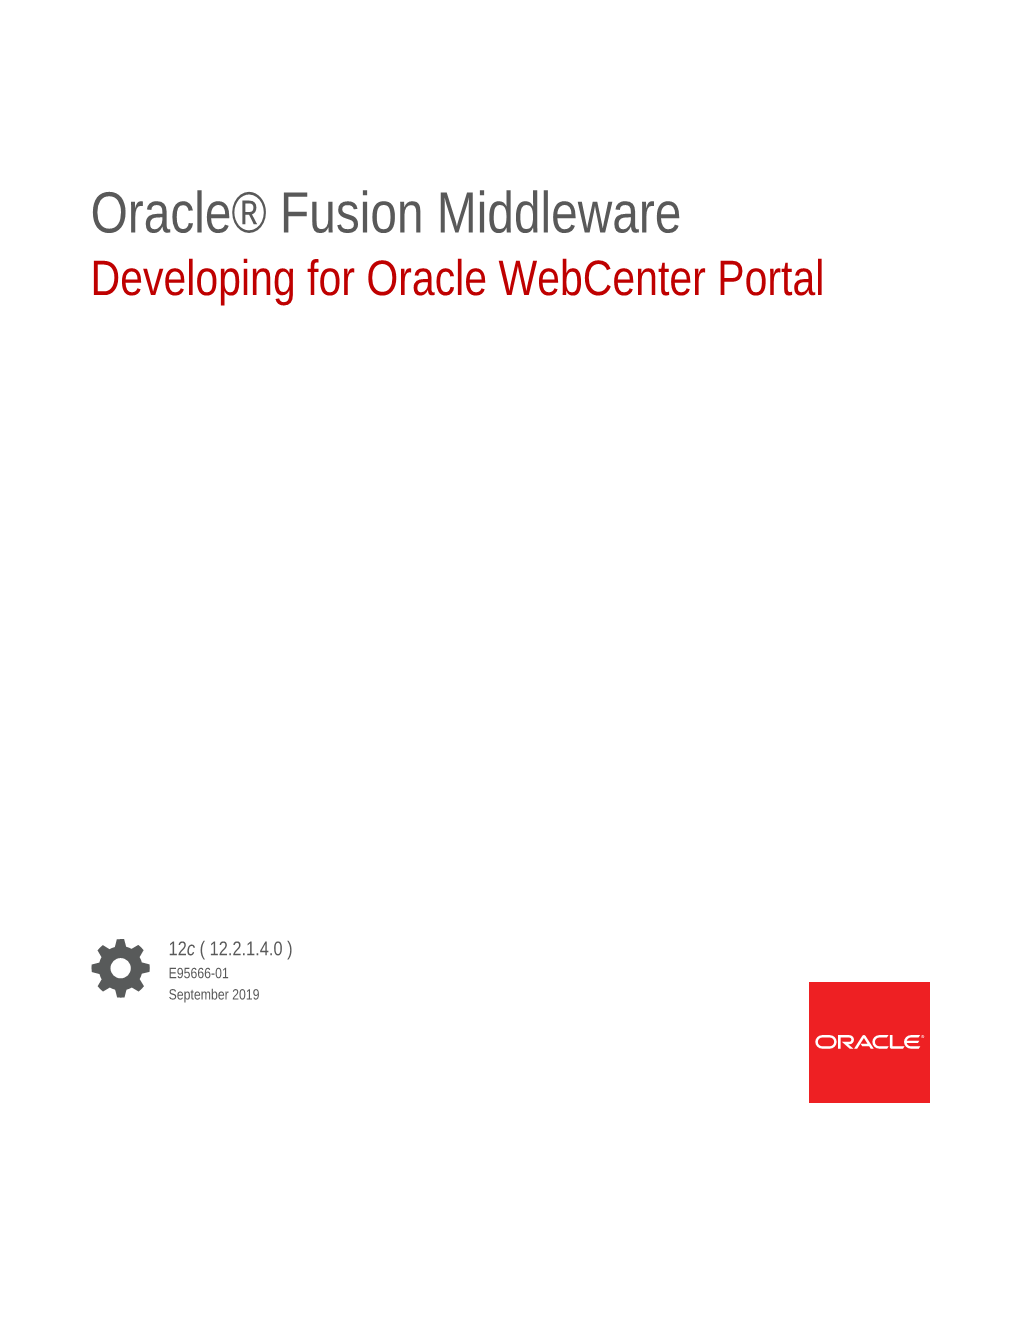 Developing for Oracle Webcenter Portal